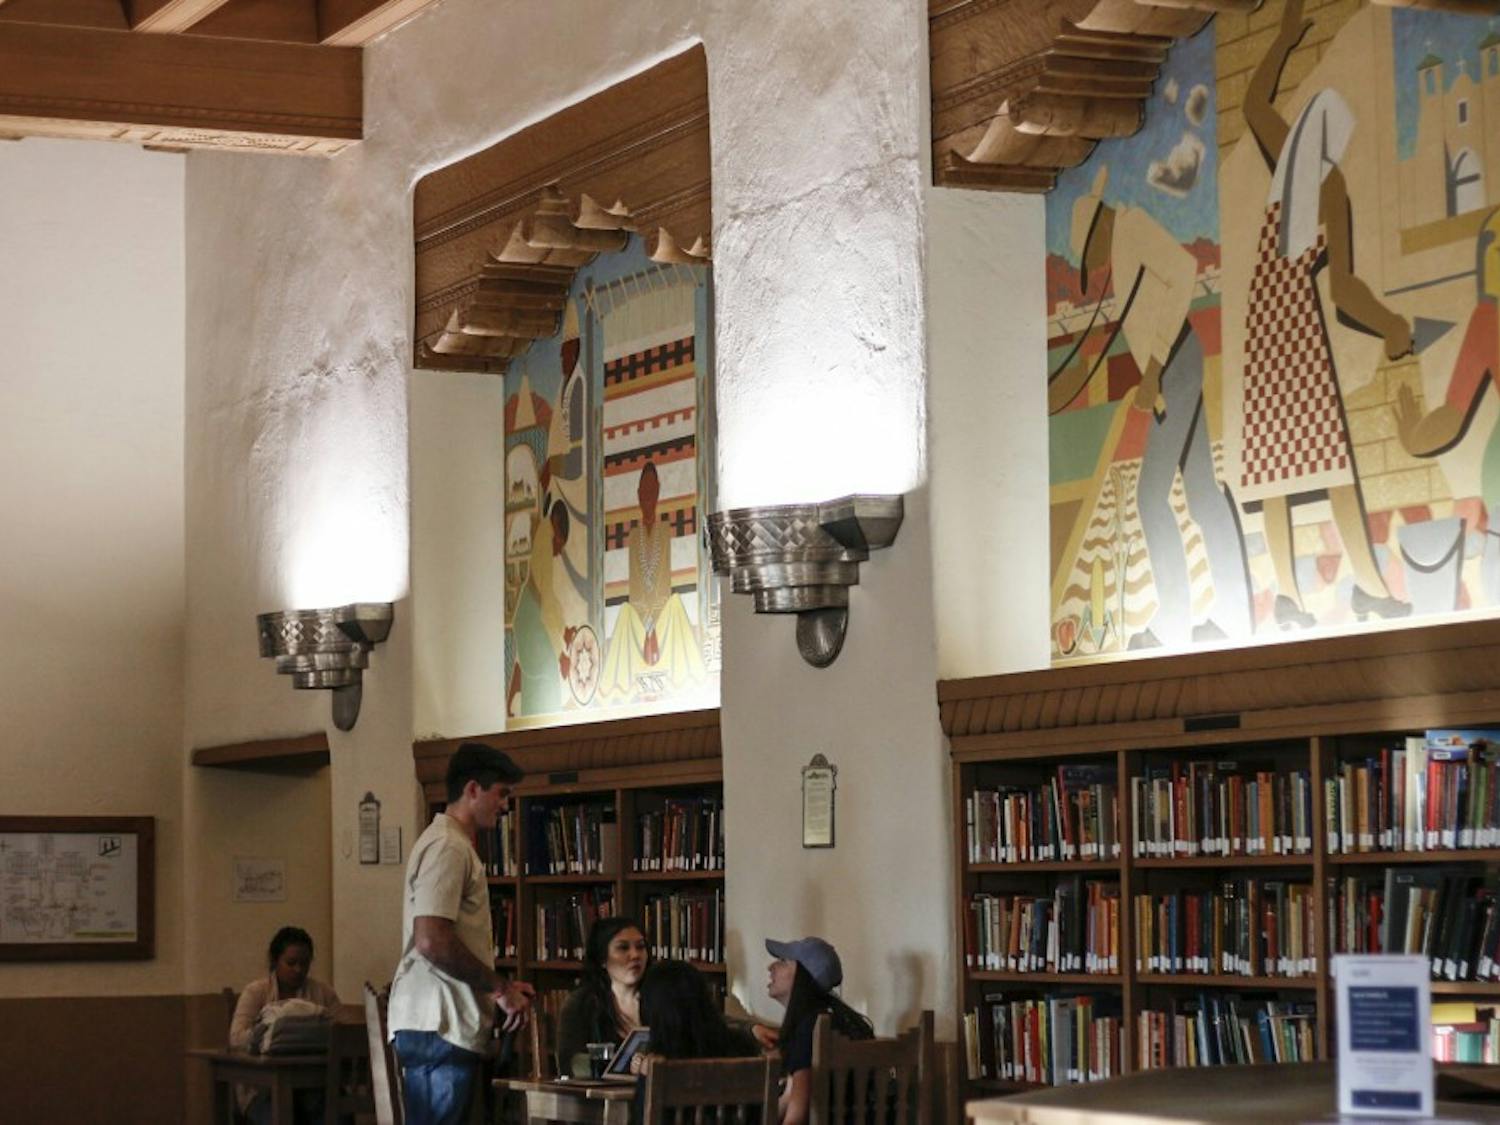 “The Three Peoples Murals” is located in the west wing of Zimmerman Library. The mural is composed of four different paintings created in 1939 by Kenneth Adams.